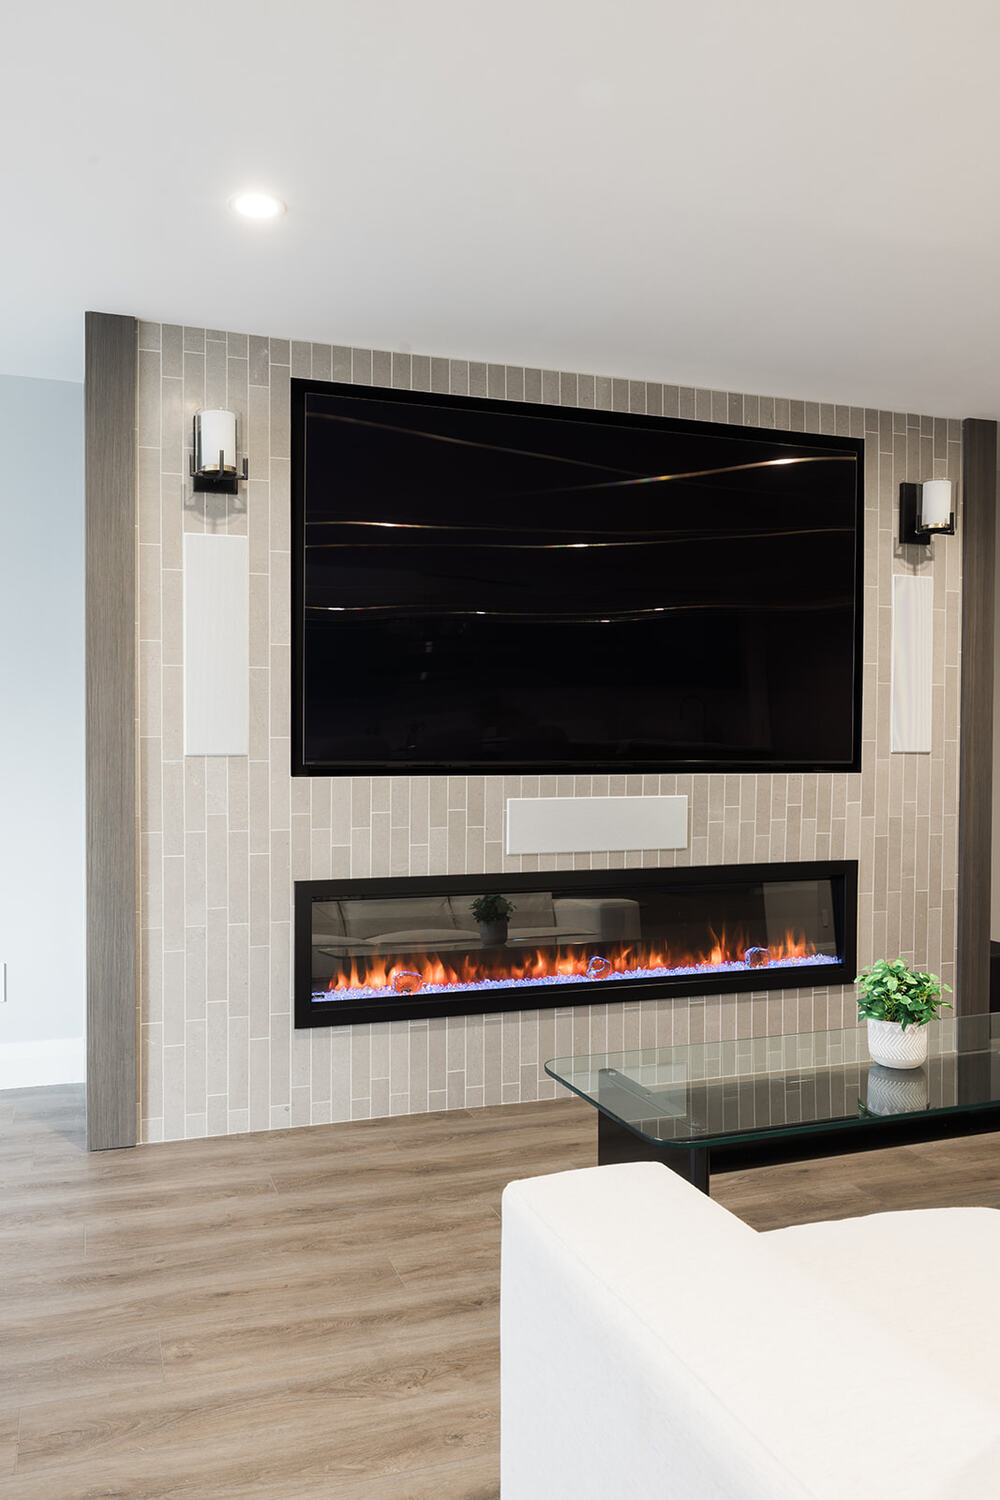 View of custom fireplace with mounted TV above in living room in downtown Toronto condo renovation with light sconces